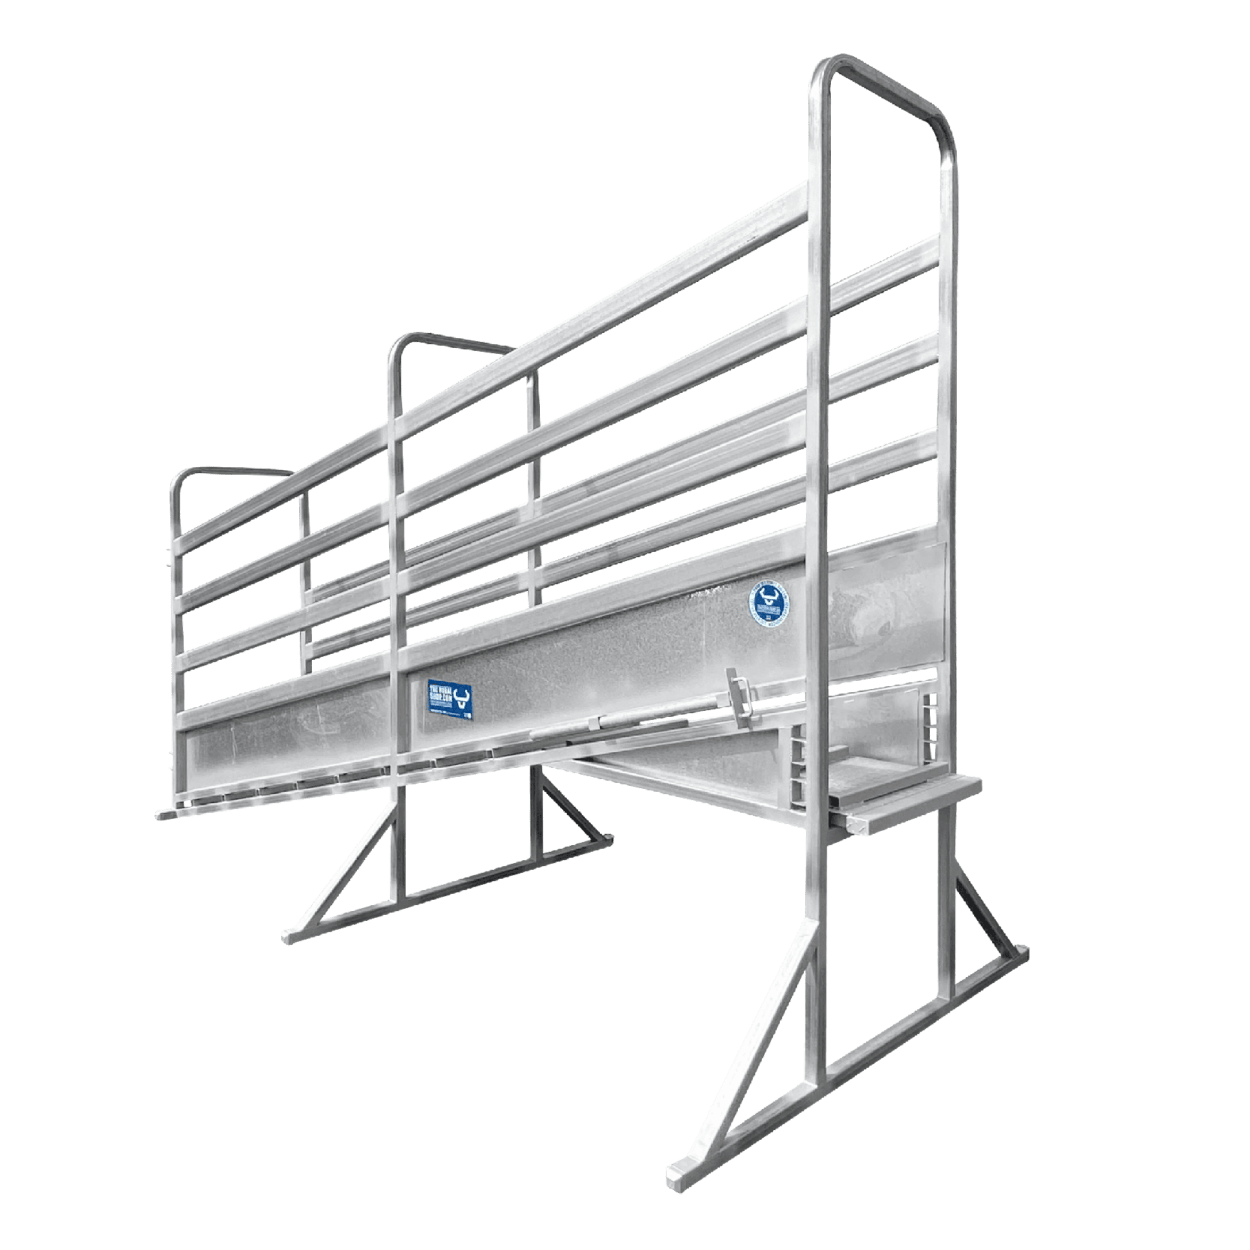 4.5m Adjustable Loading Ramp. Adjust height from 750mm to 1200mm, ideal for car trailers to full size cattle trucks. Features gentle slope for safe and efficient loading and a 3mm galvanised steel floor.